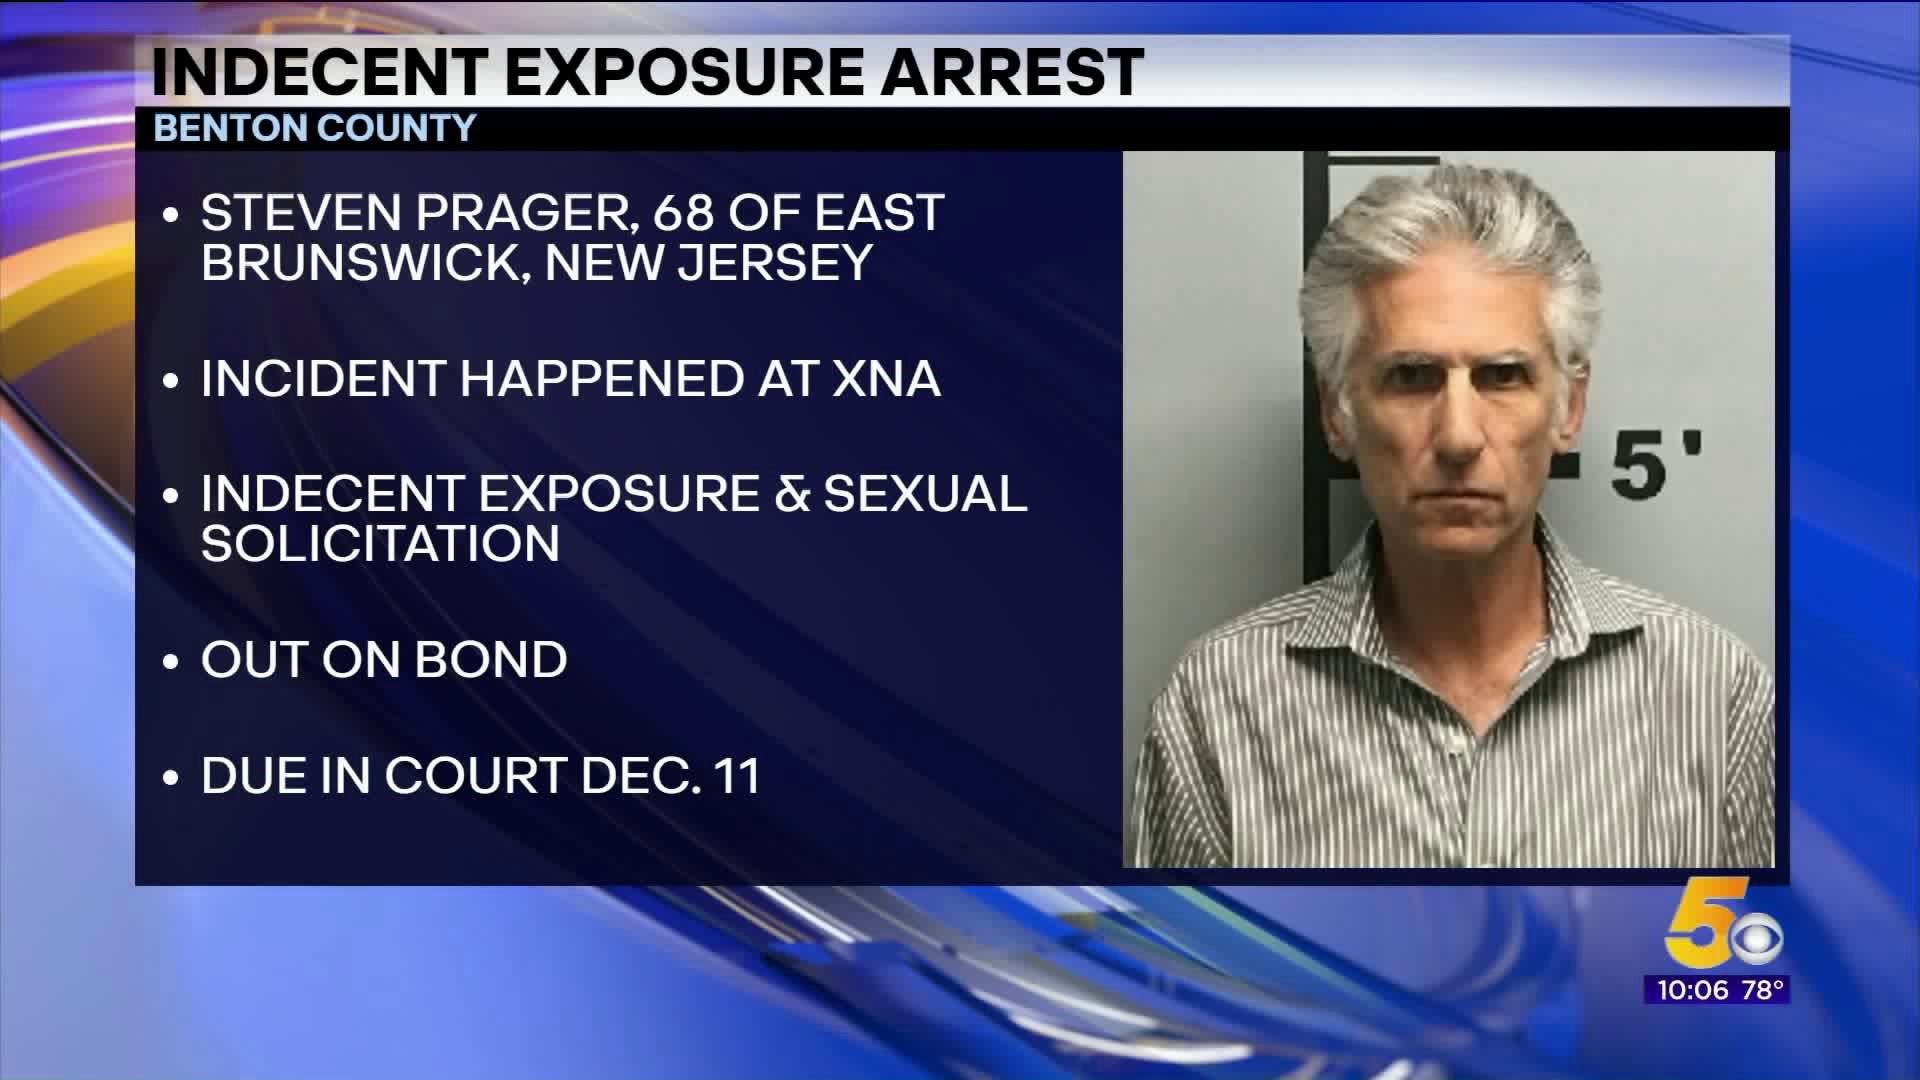 New Jersey Man Arrested For Indecent Exposure At XNA